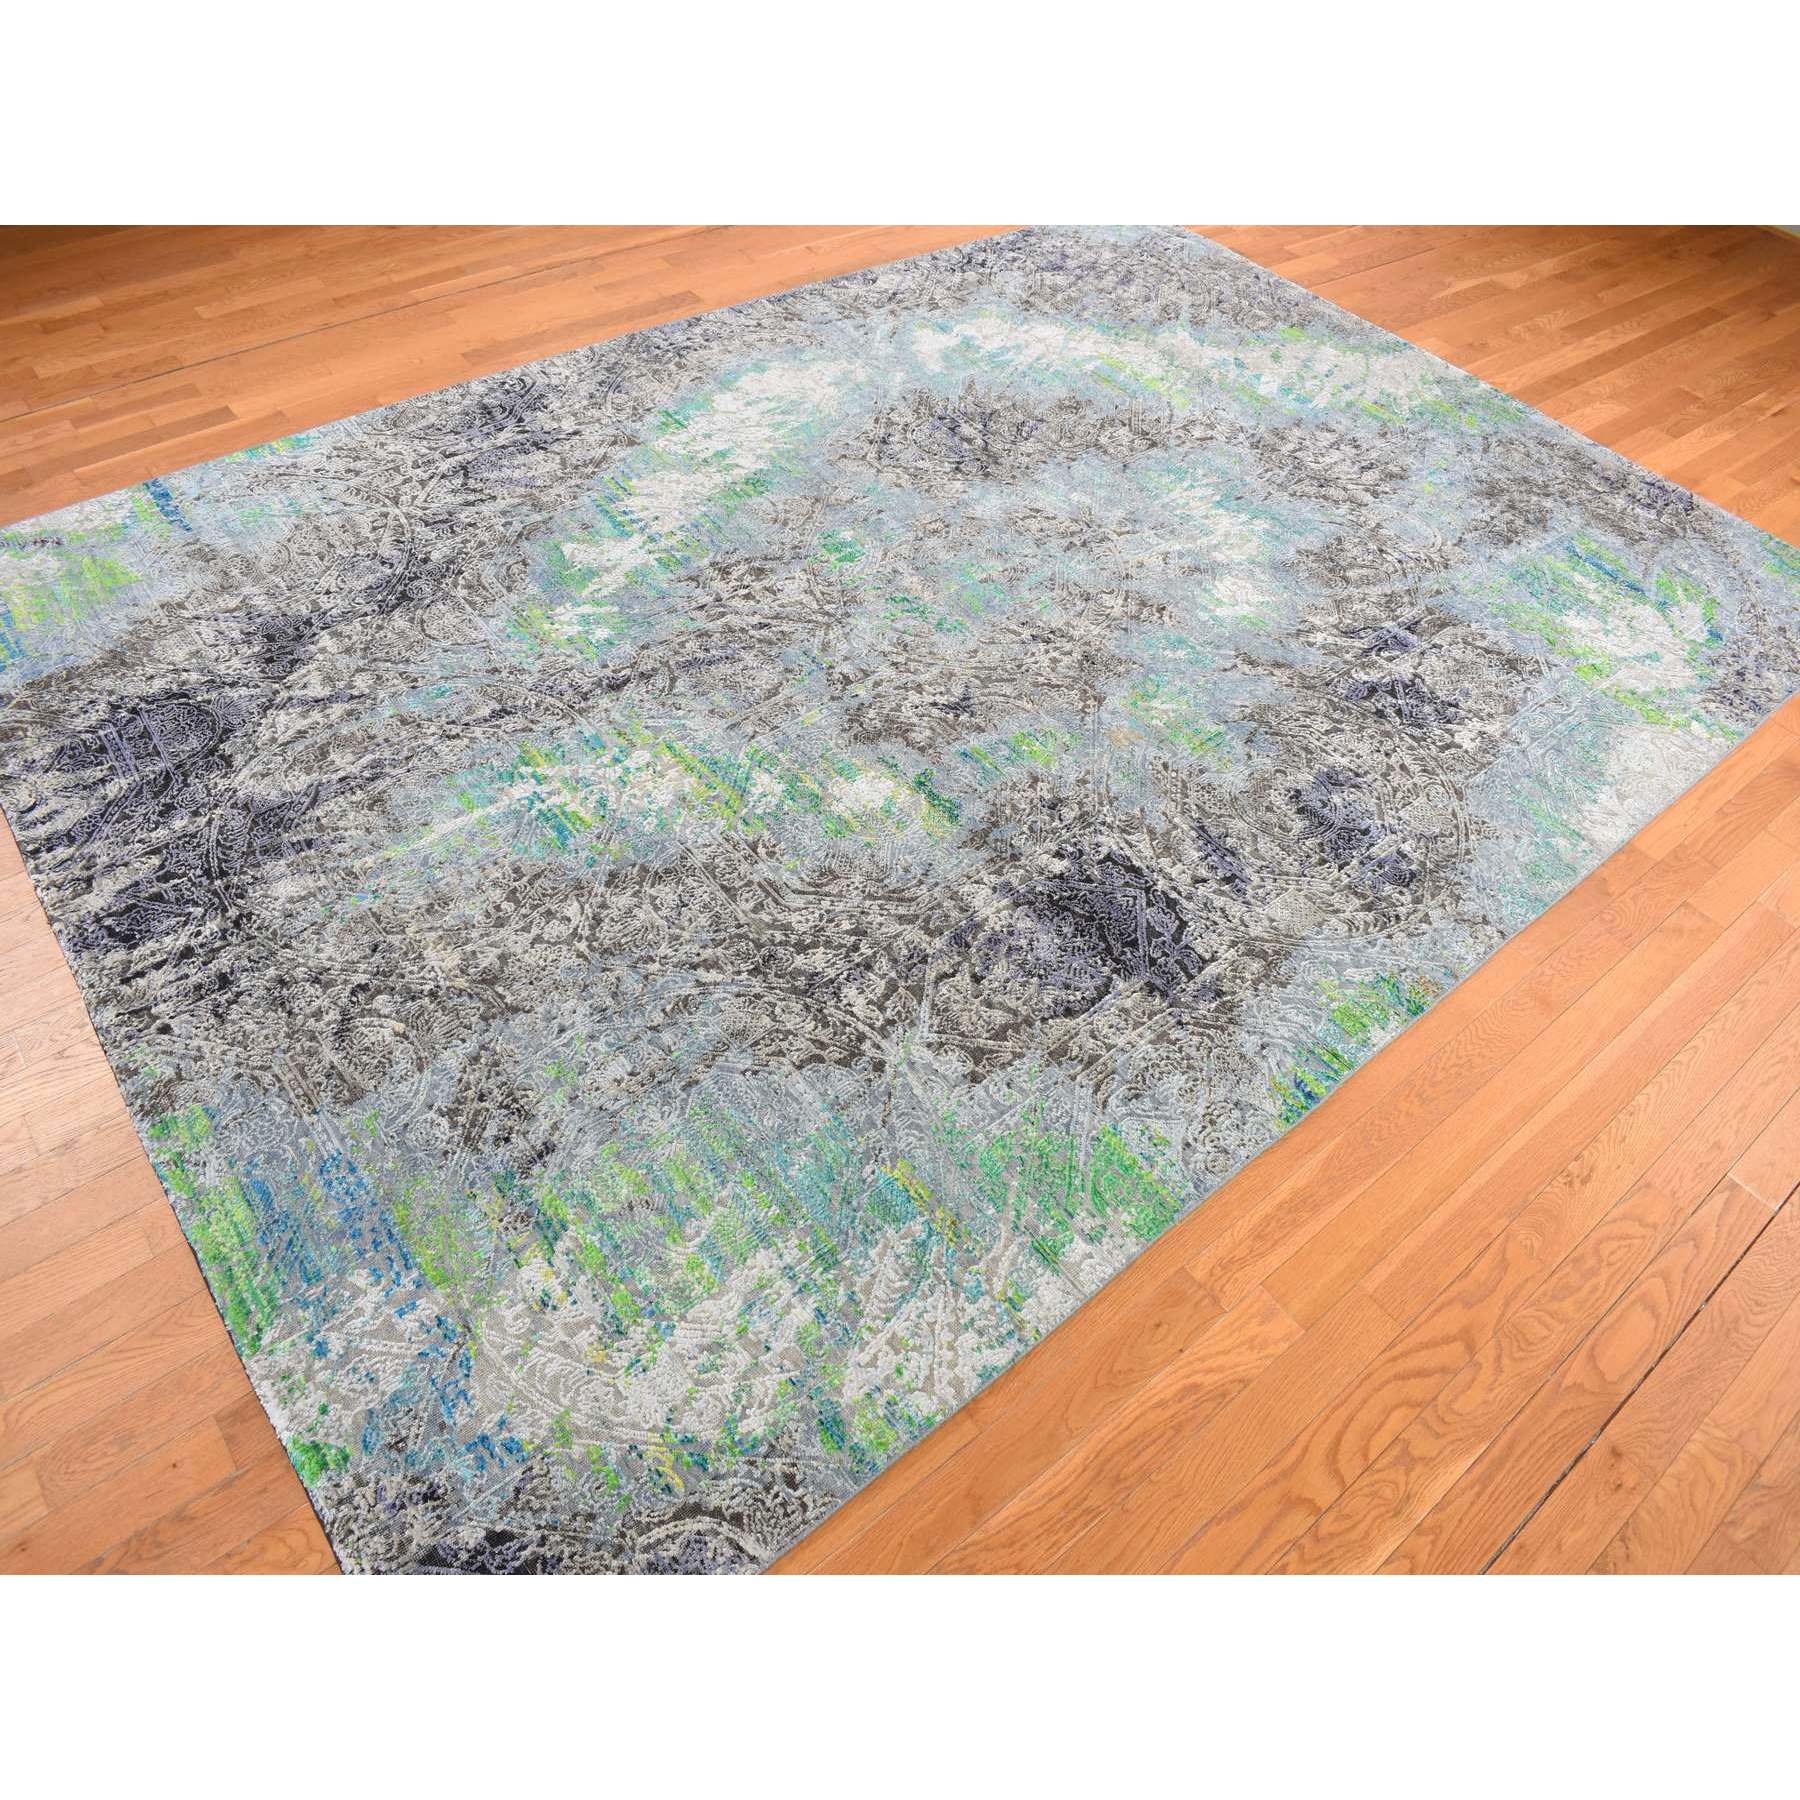  Silk Hand-Knotted Area Rug 8'10